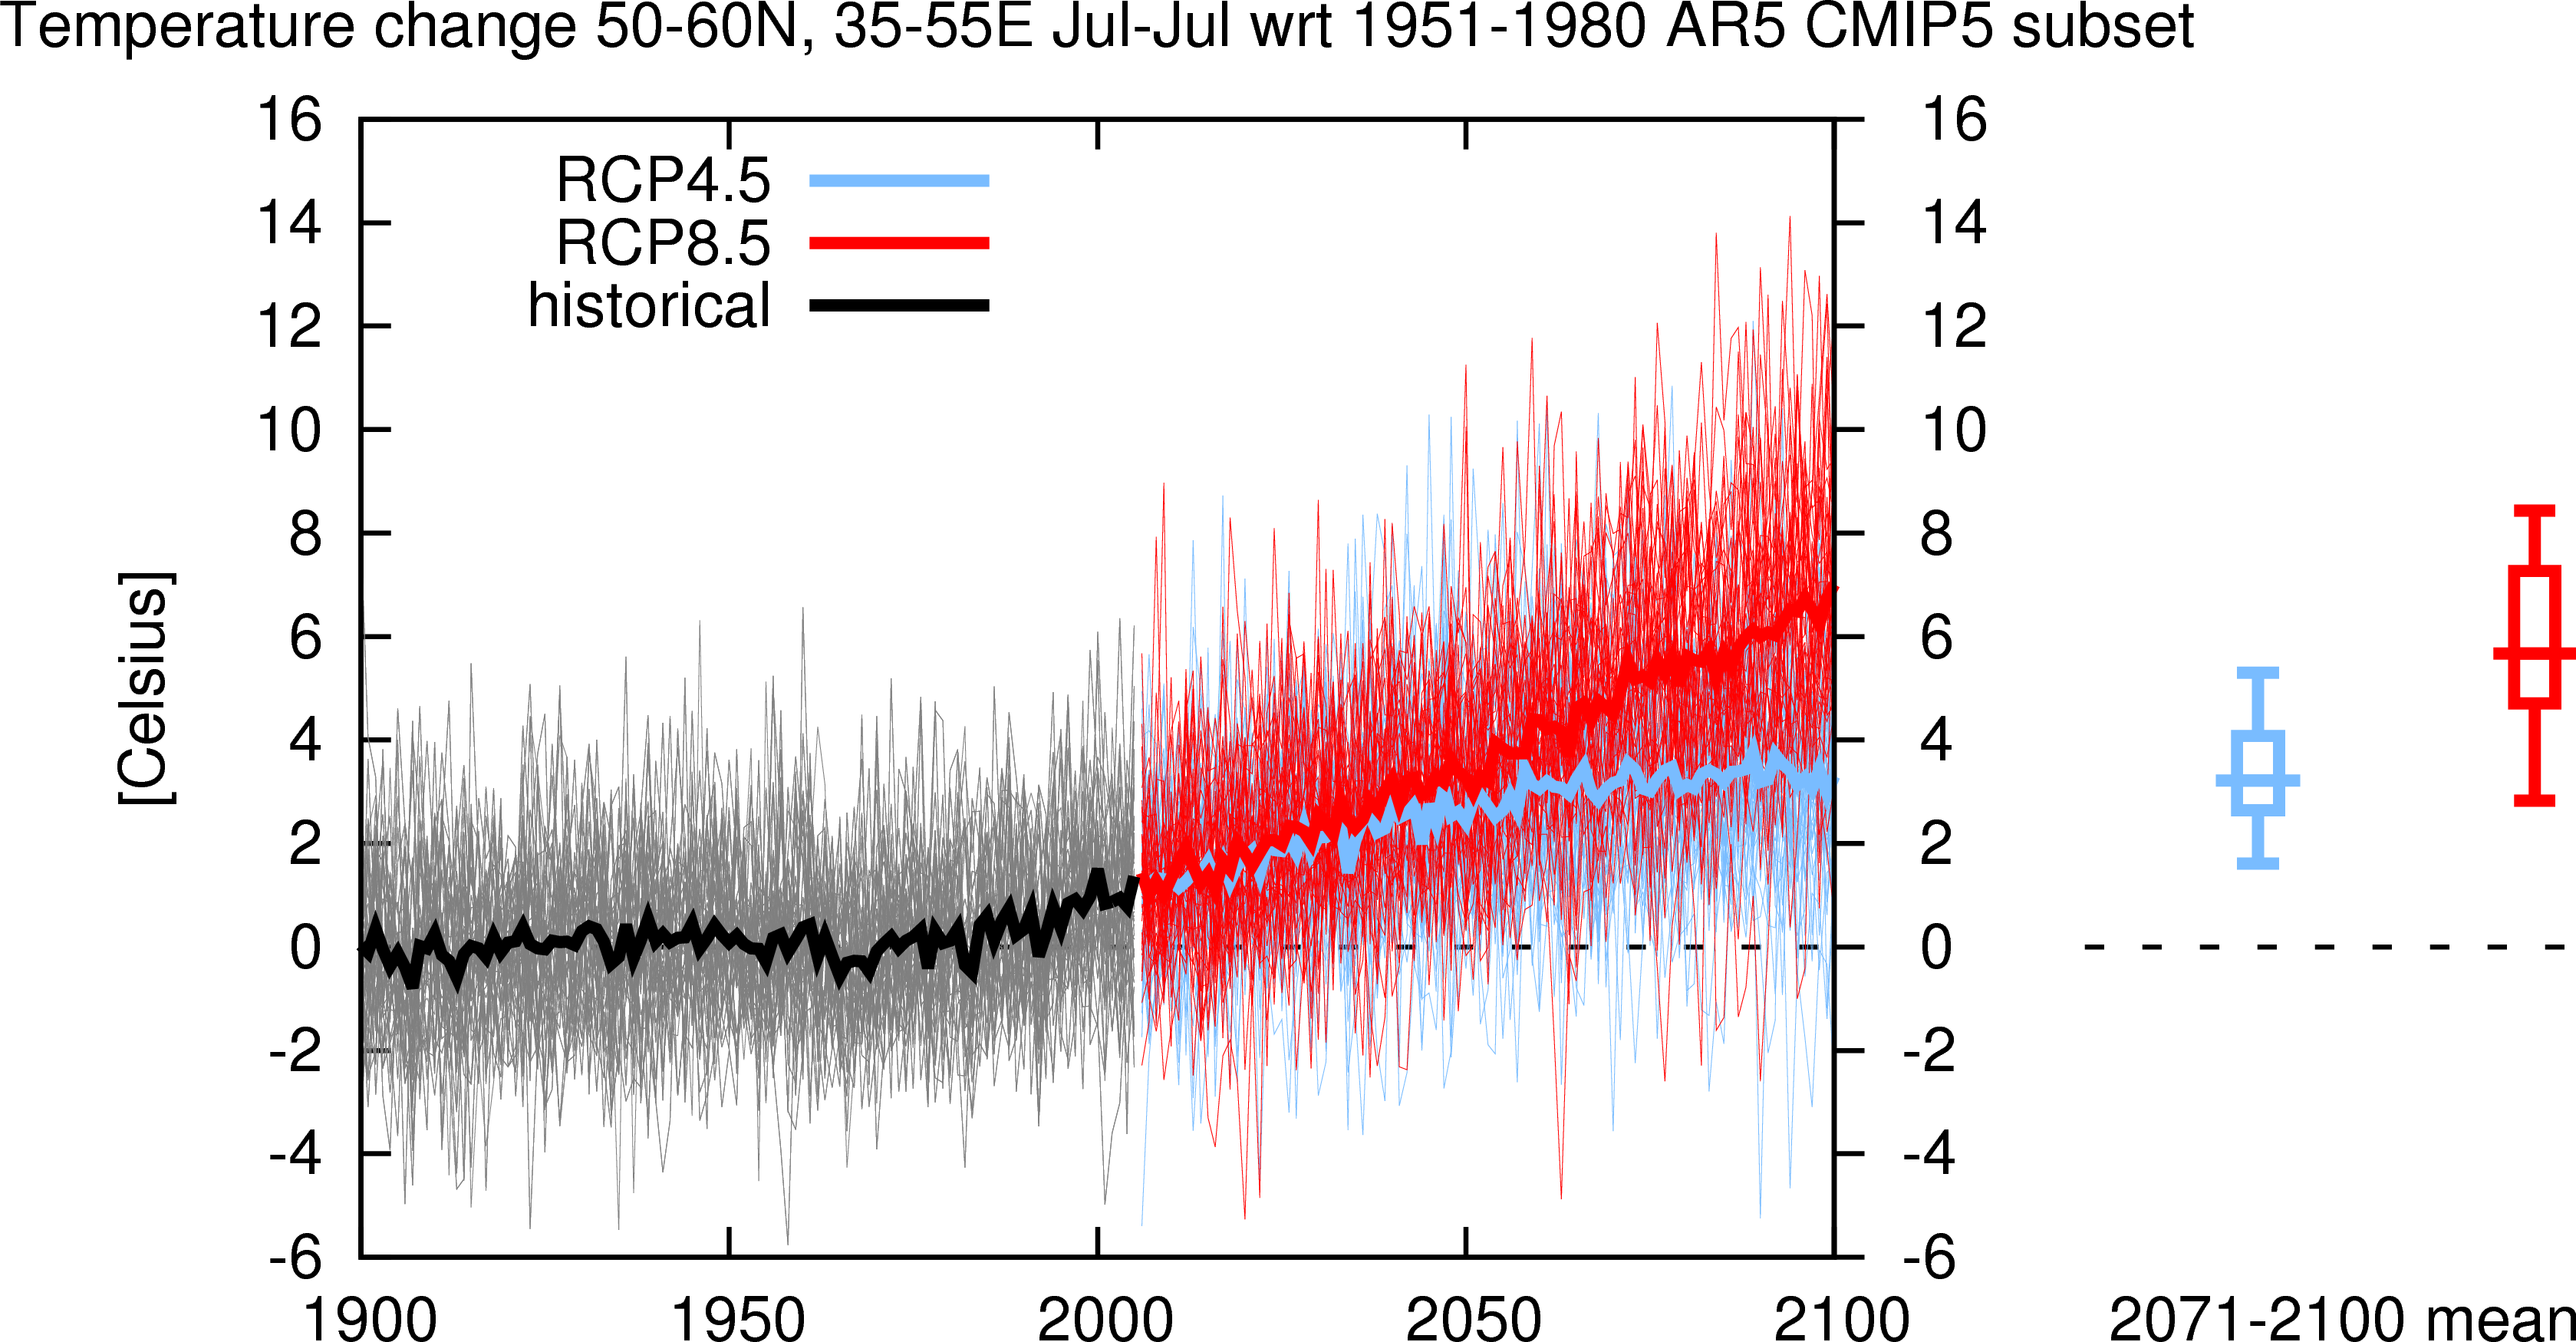 CMIP5 temperature change in 50-60N, 35-55E, in July